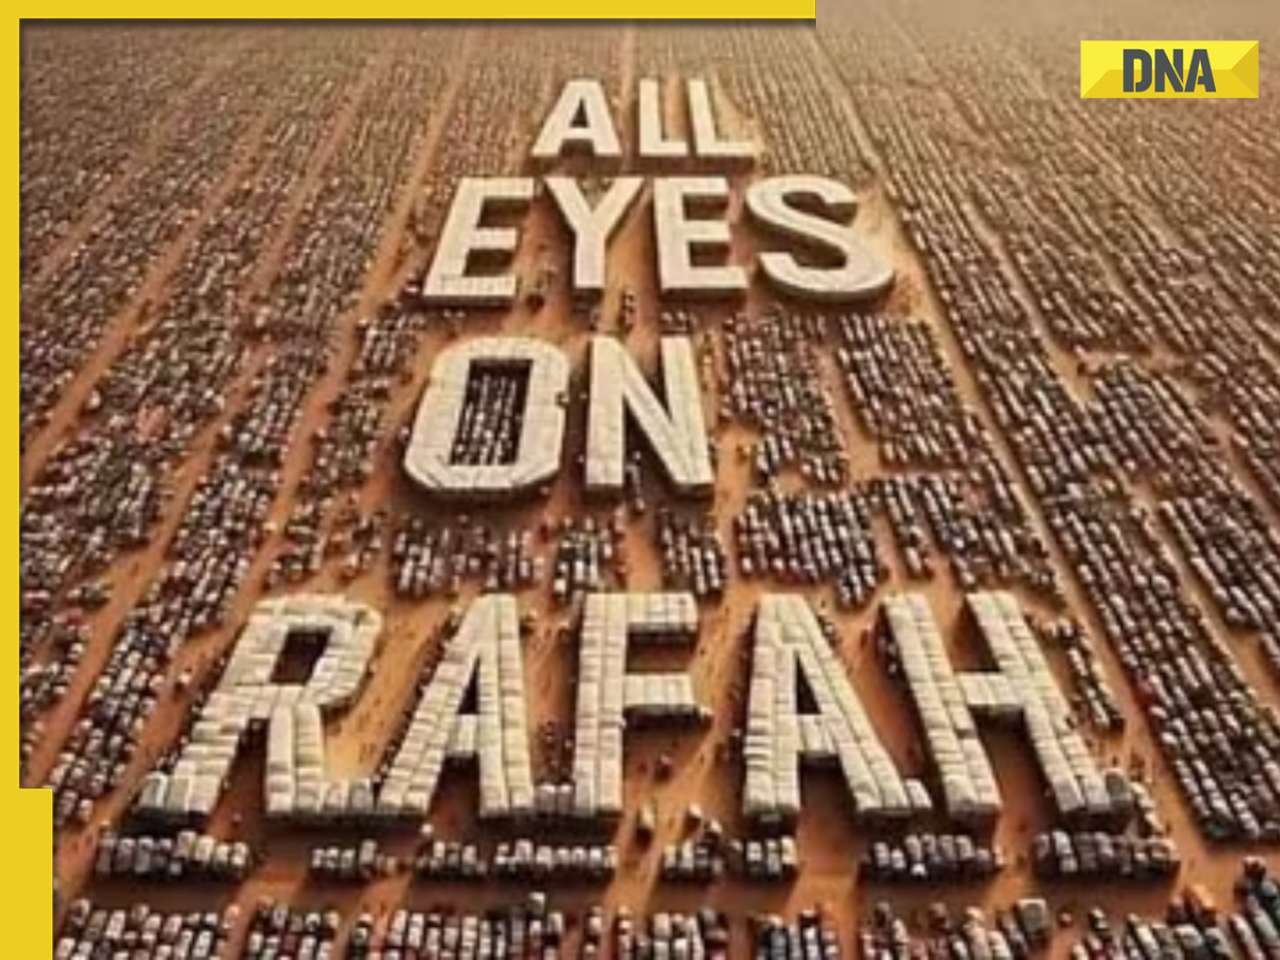 'All Eyes On Rafah' campaign goes viral on social media, here's what the image means